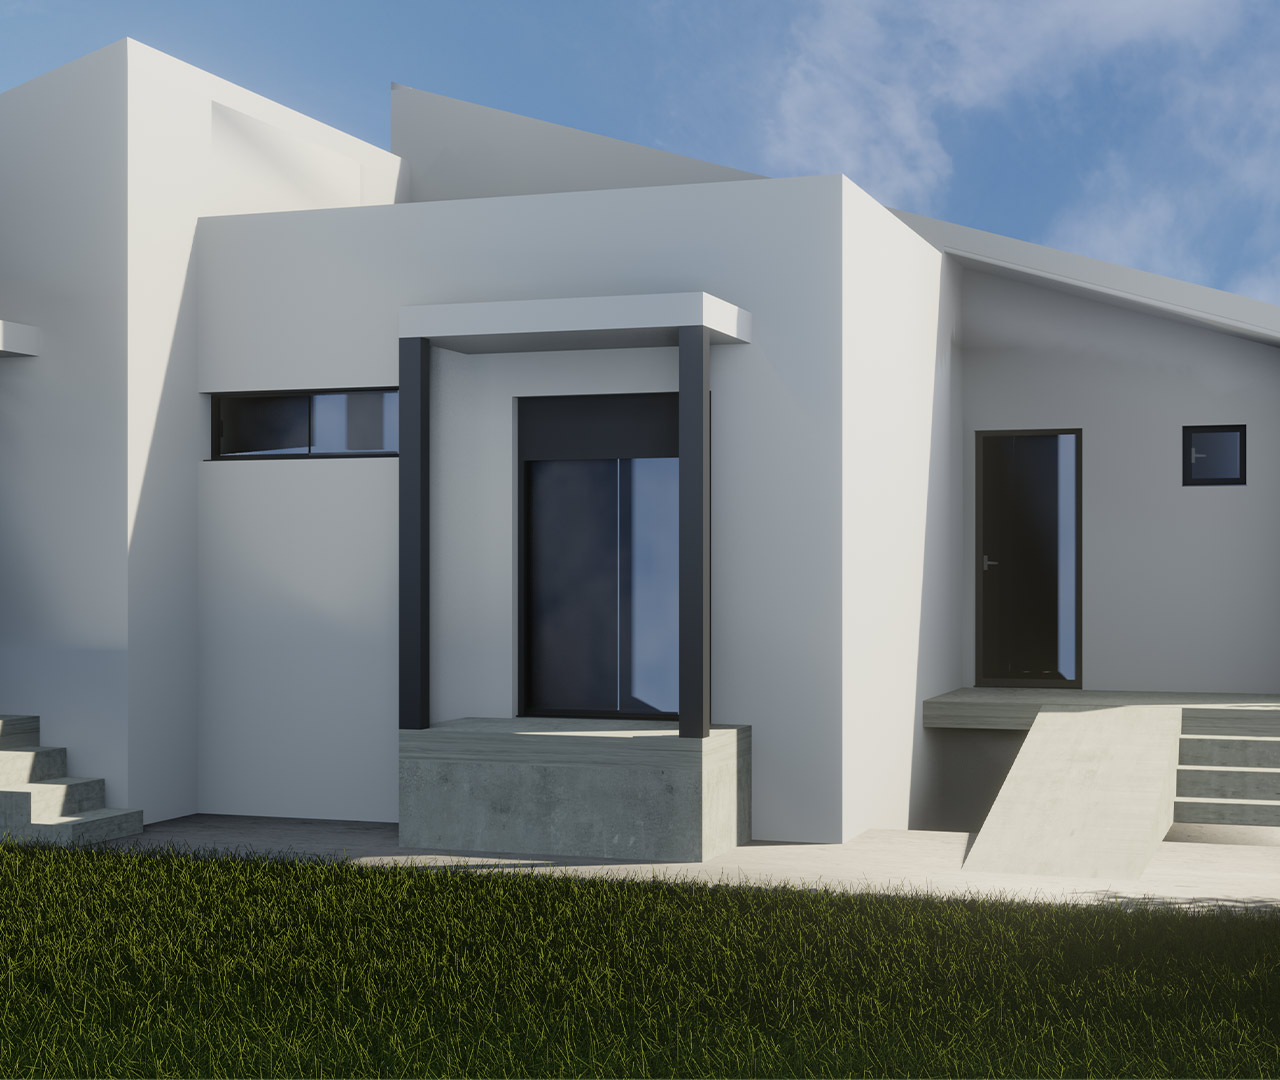 Construction of a detached house in Nea Peramos